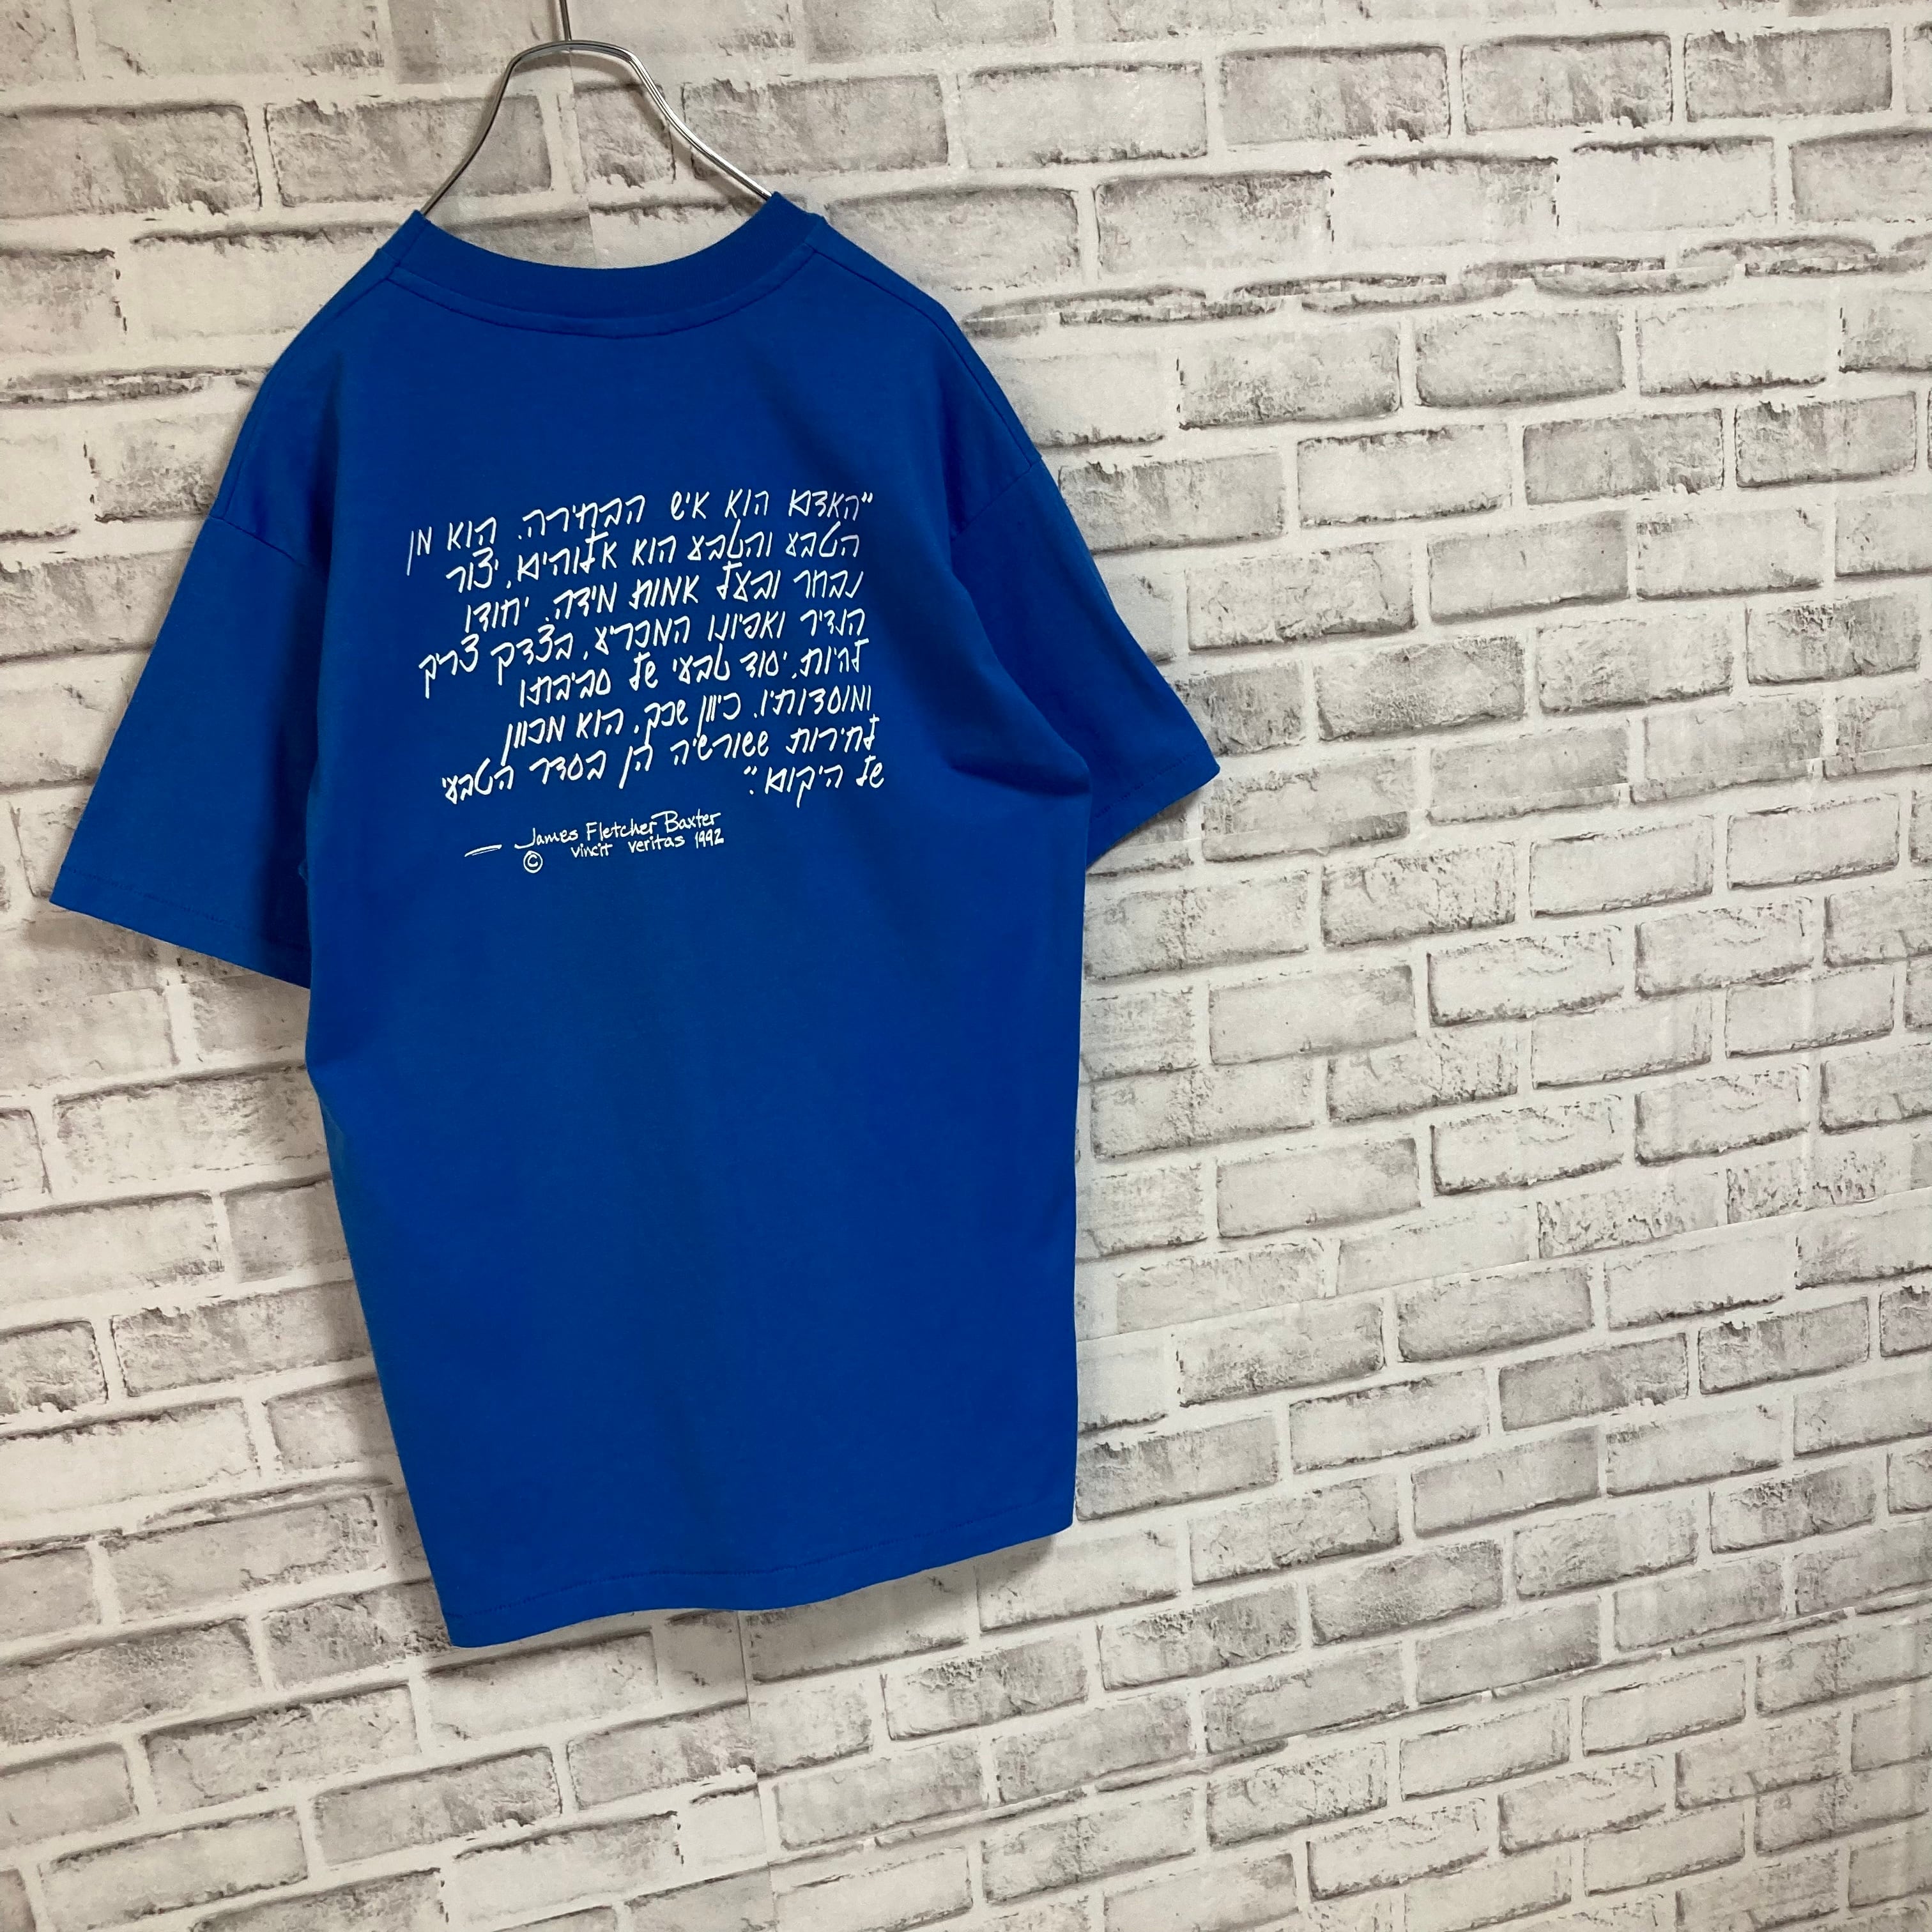 【Hanes】S/S Tee L Made in USA 80s vintage ヘインズ バックプリント Tシャツ 両面プリント USA製  ヴィンテージ ビンテージ テキストT 哲学 シングルステッチ アメリカ USA 古着